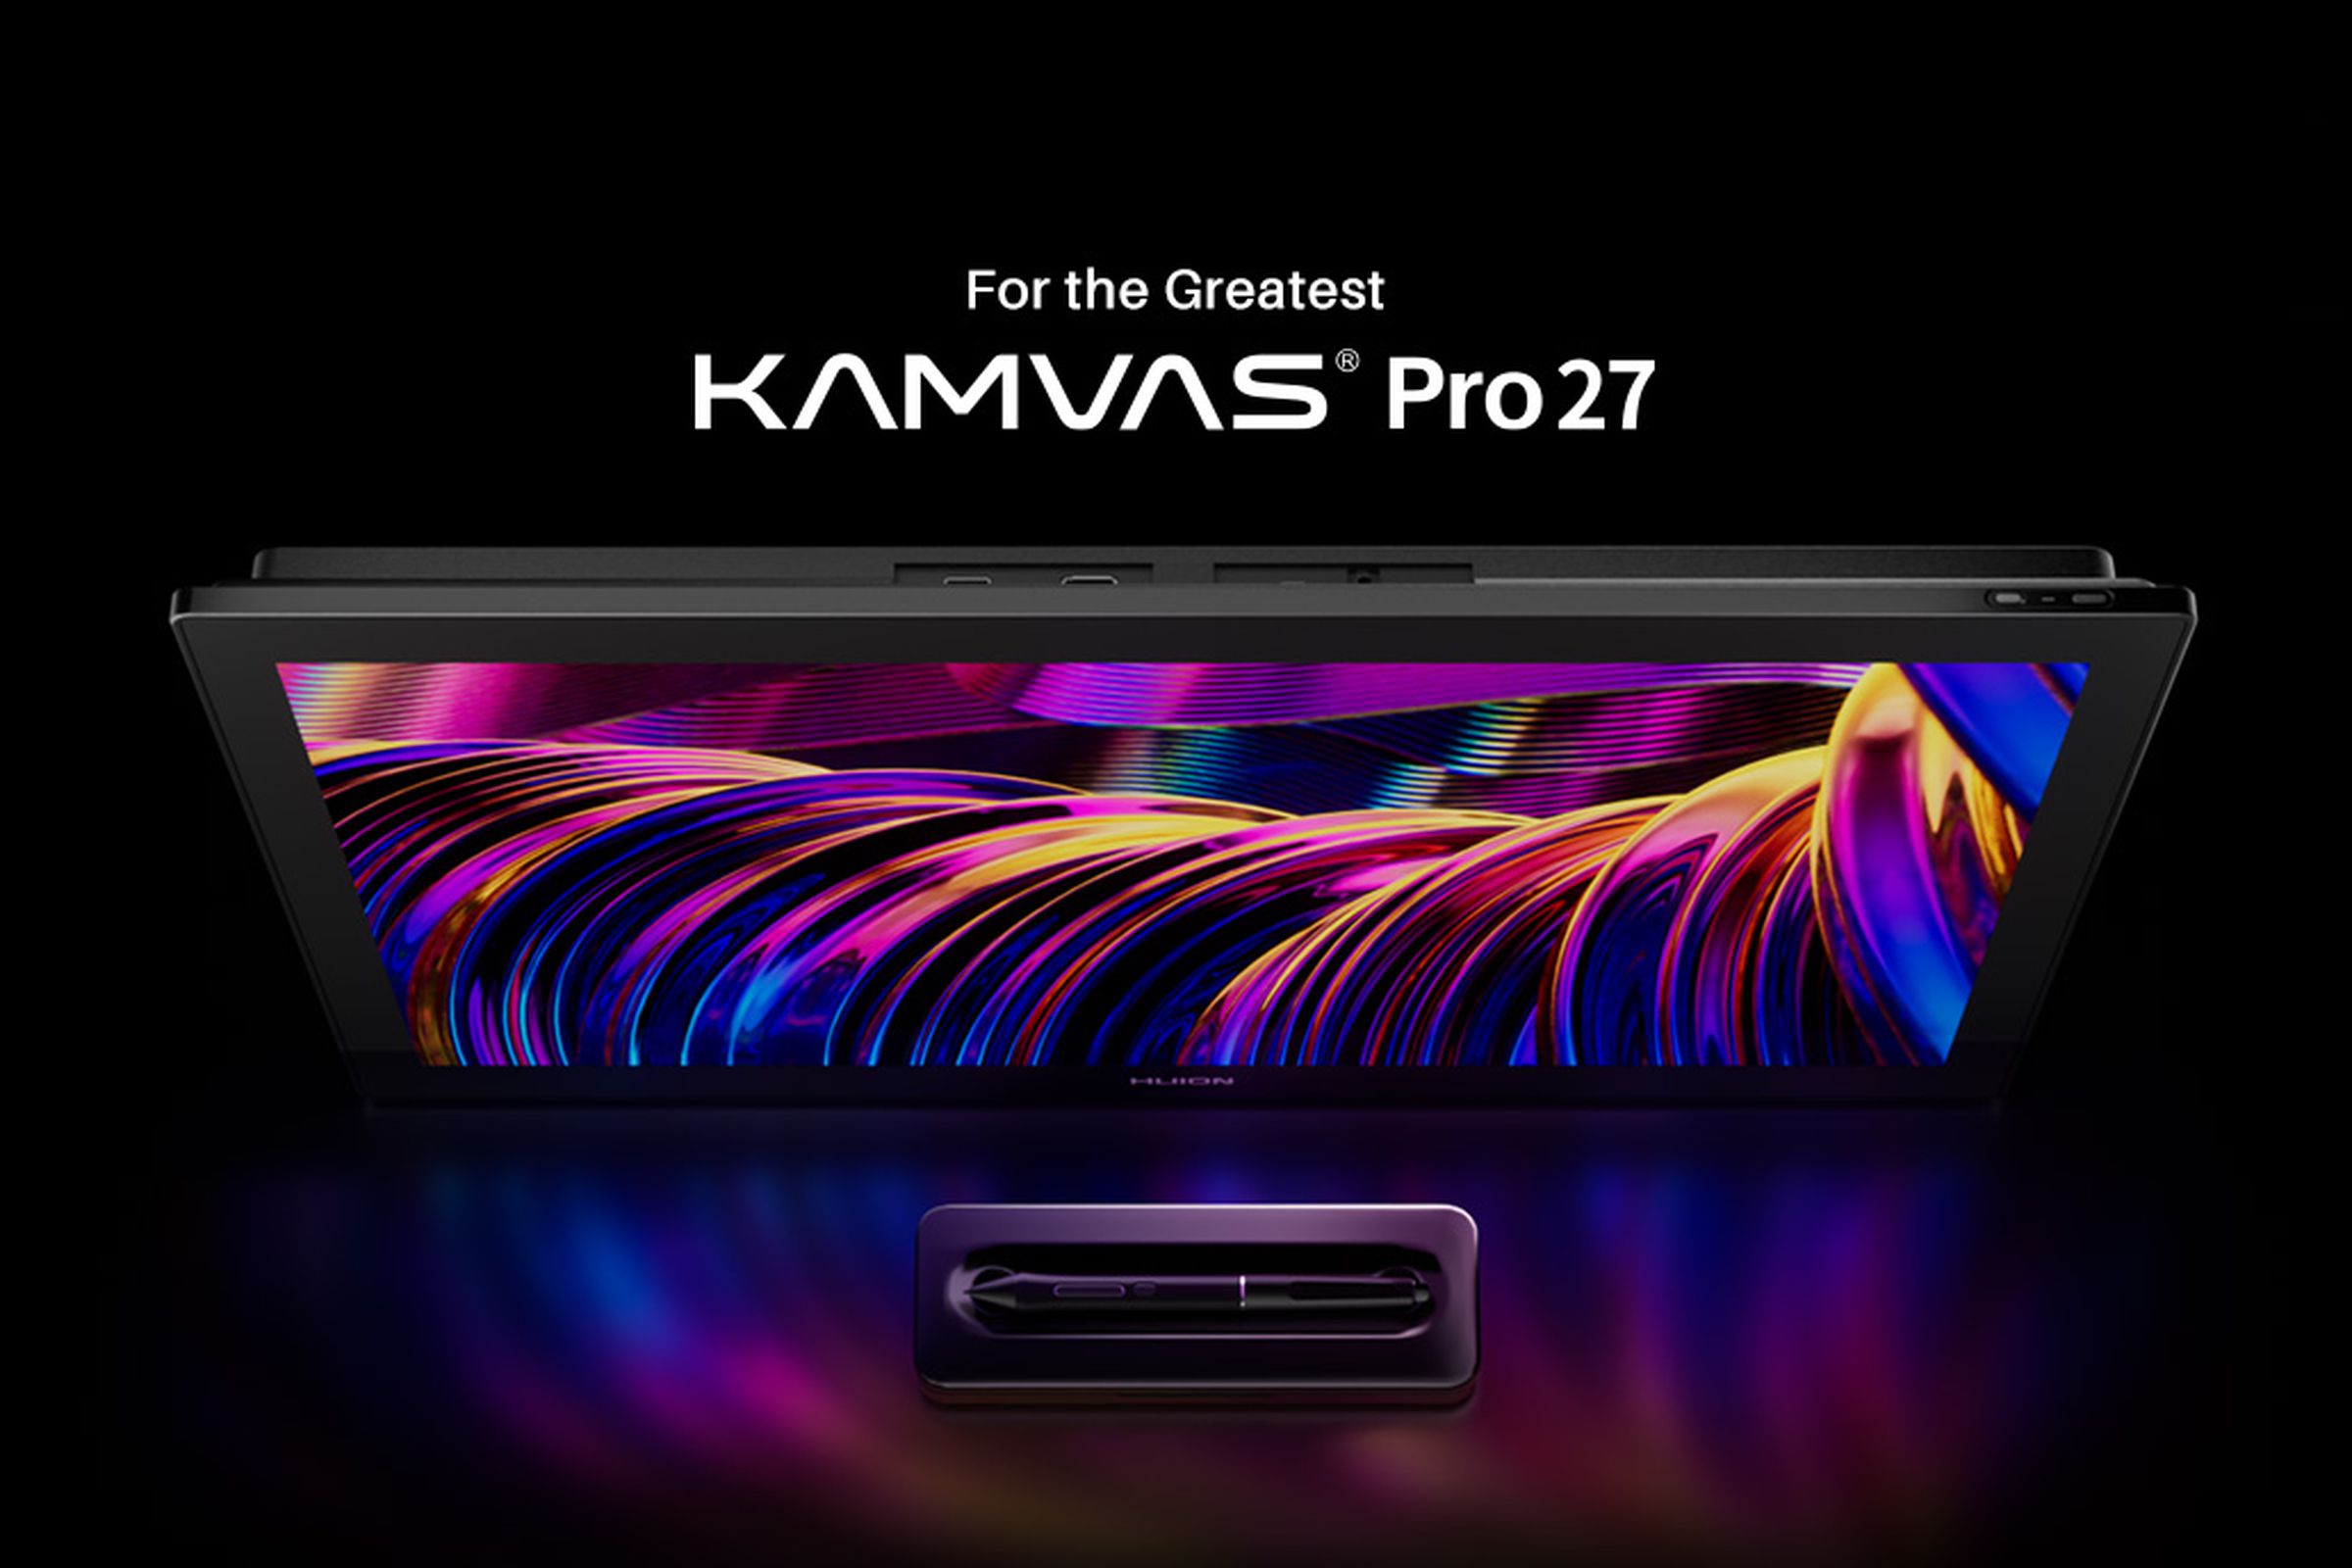 The Huion Kamvas Pro 27 and its two pen styluses against a black backdrop.